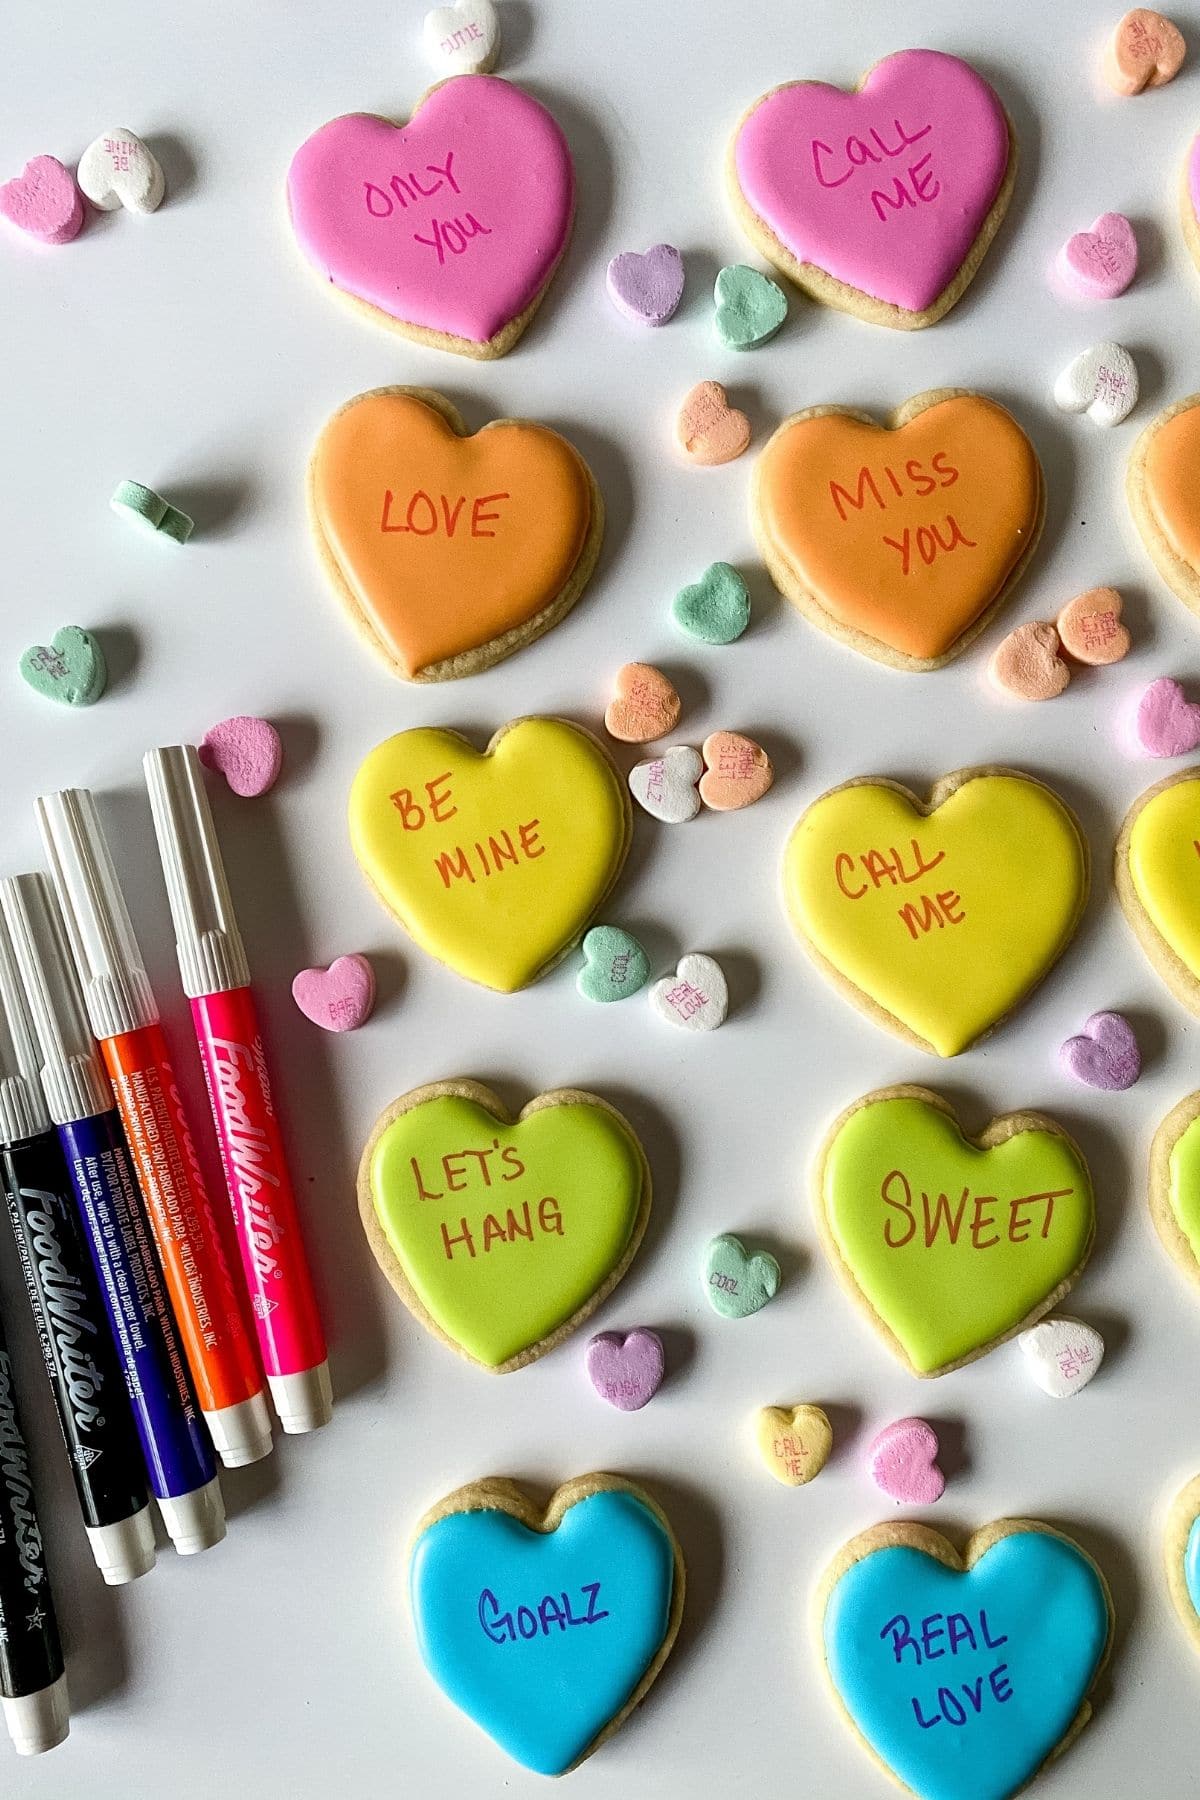 Conversation heart cookies with edible markers on table